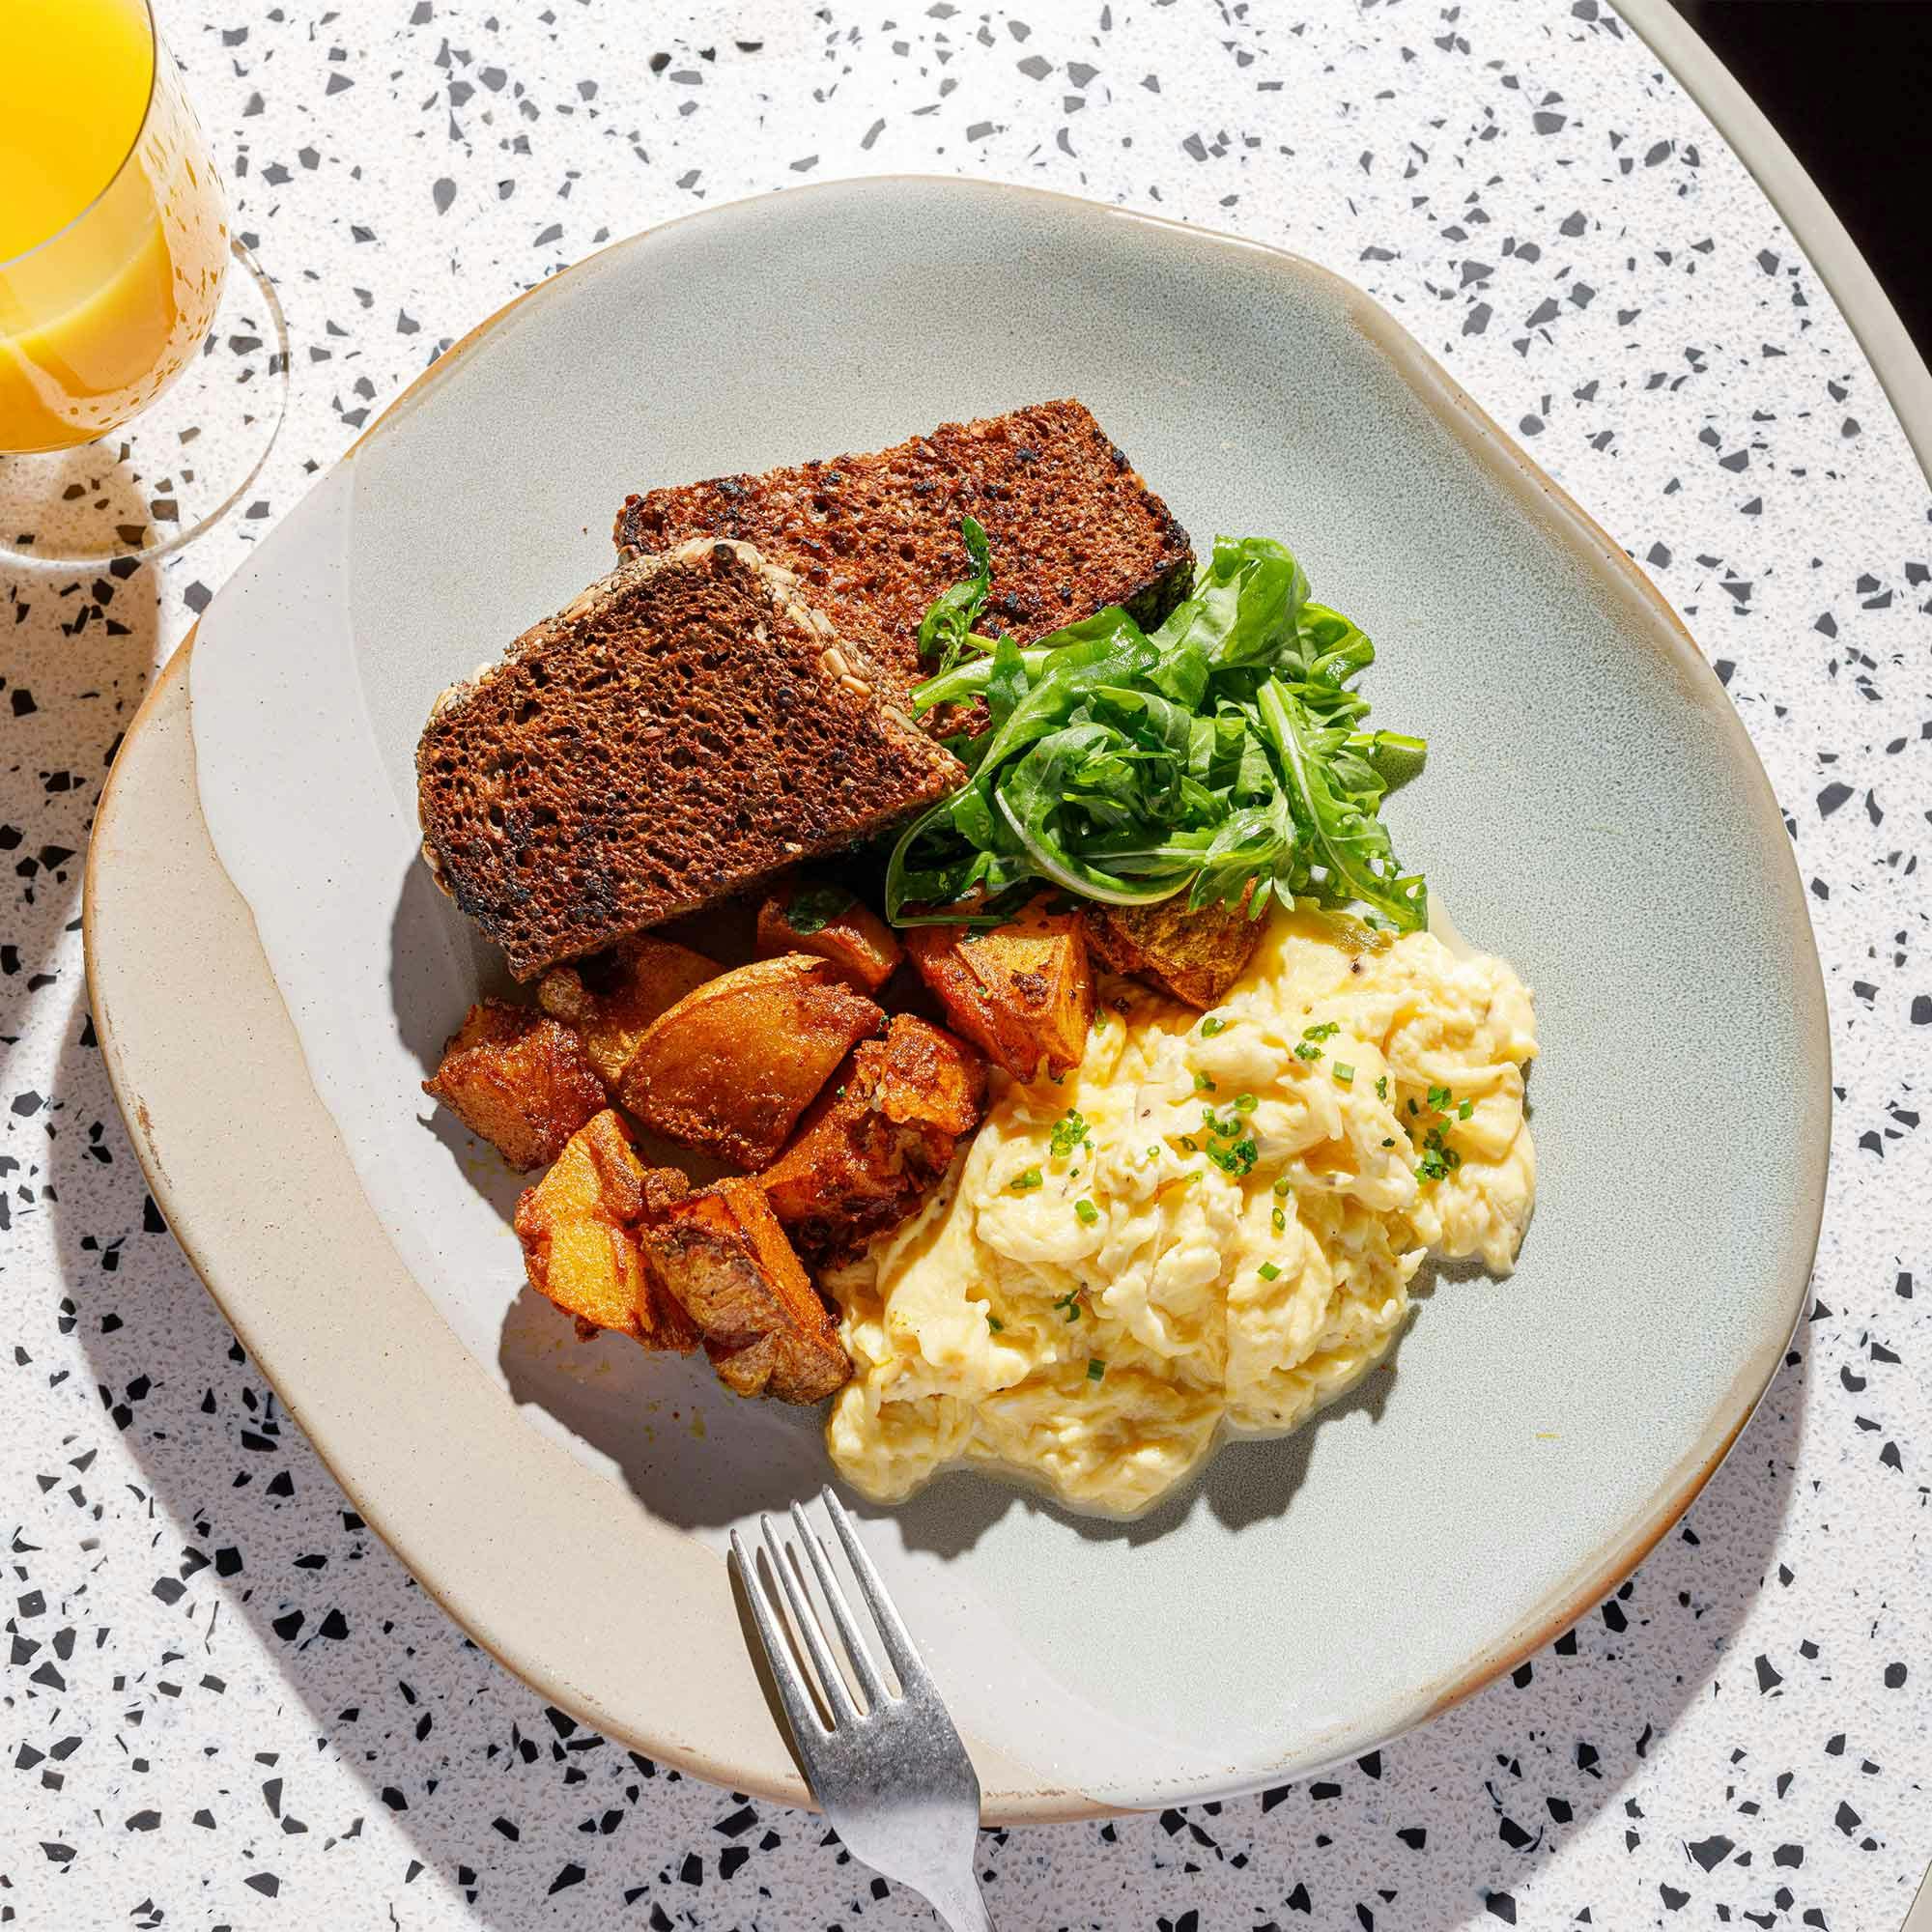 Scrambled eggs, breakfast potatoes, wild rocket and toasted rye bread to start the day.